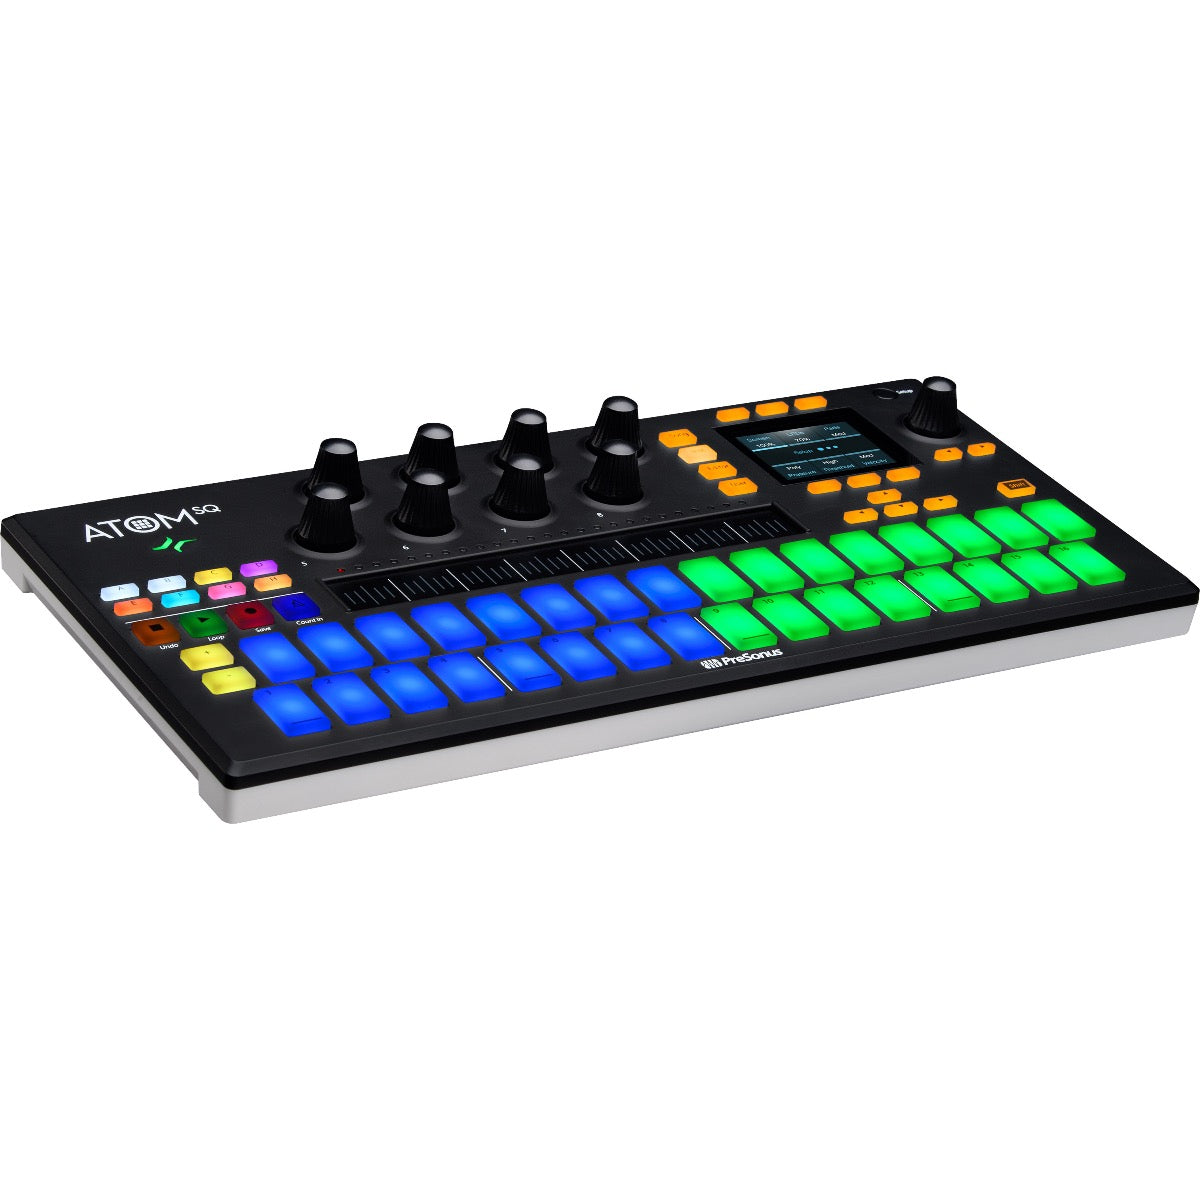 3/4 view of PreSonus Atom SQ Keyboard/Pad Controller with keyboard/step pads lit up green and blue showing top, front and left side